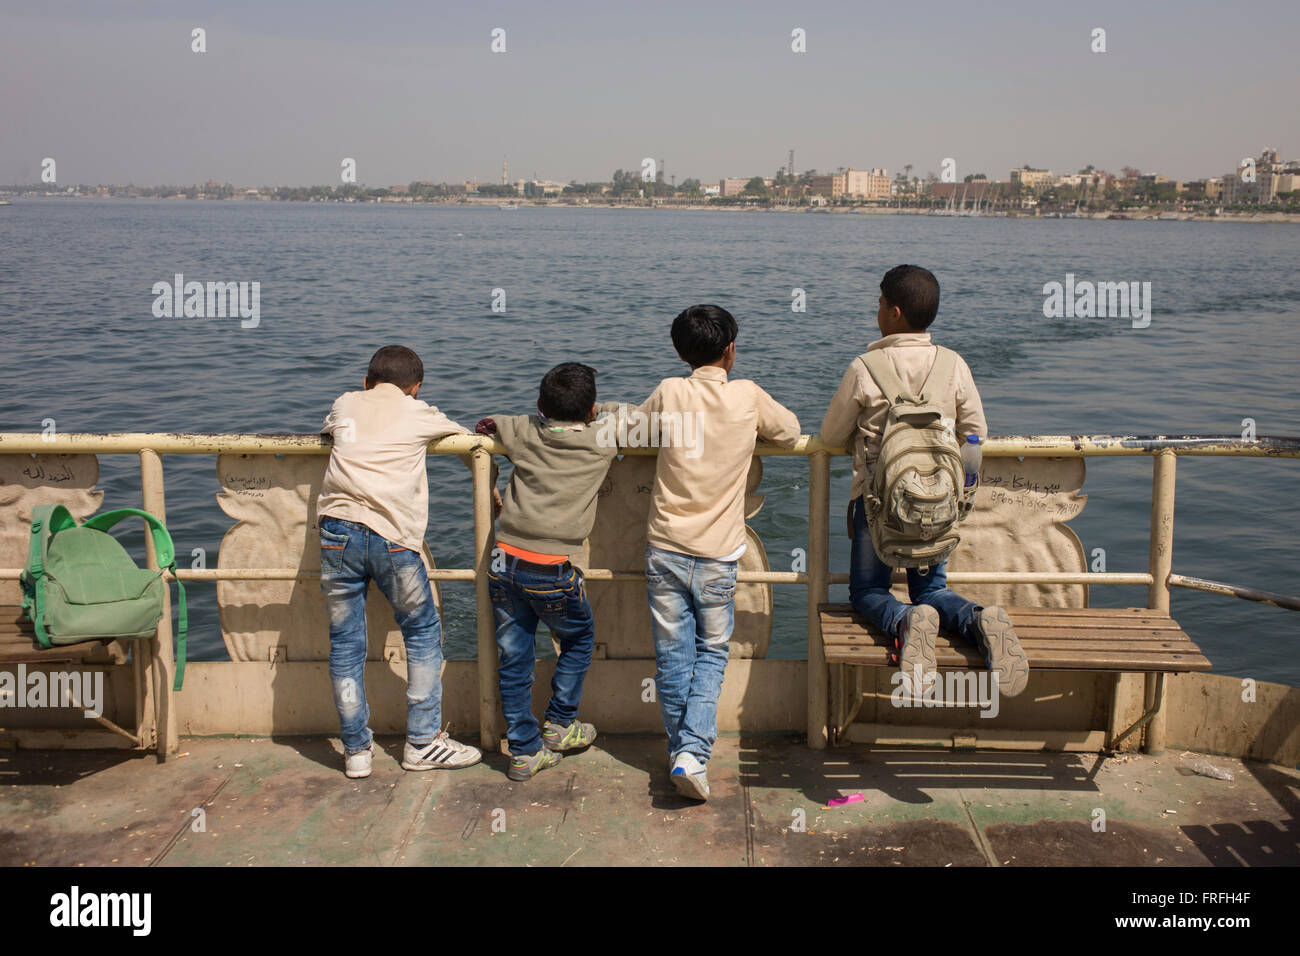 Schoolboys stand on the top deck of the state-run ferry across the River Nile at Luxor, Nile Valley, Egypt. Stock Photo